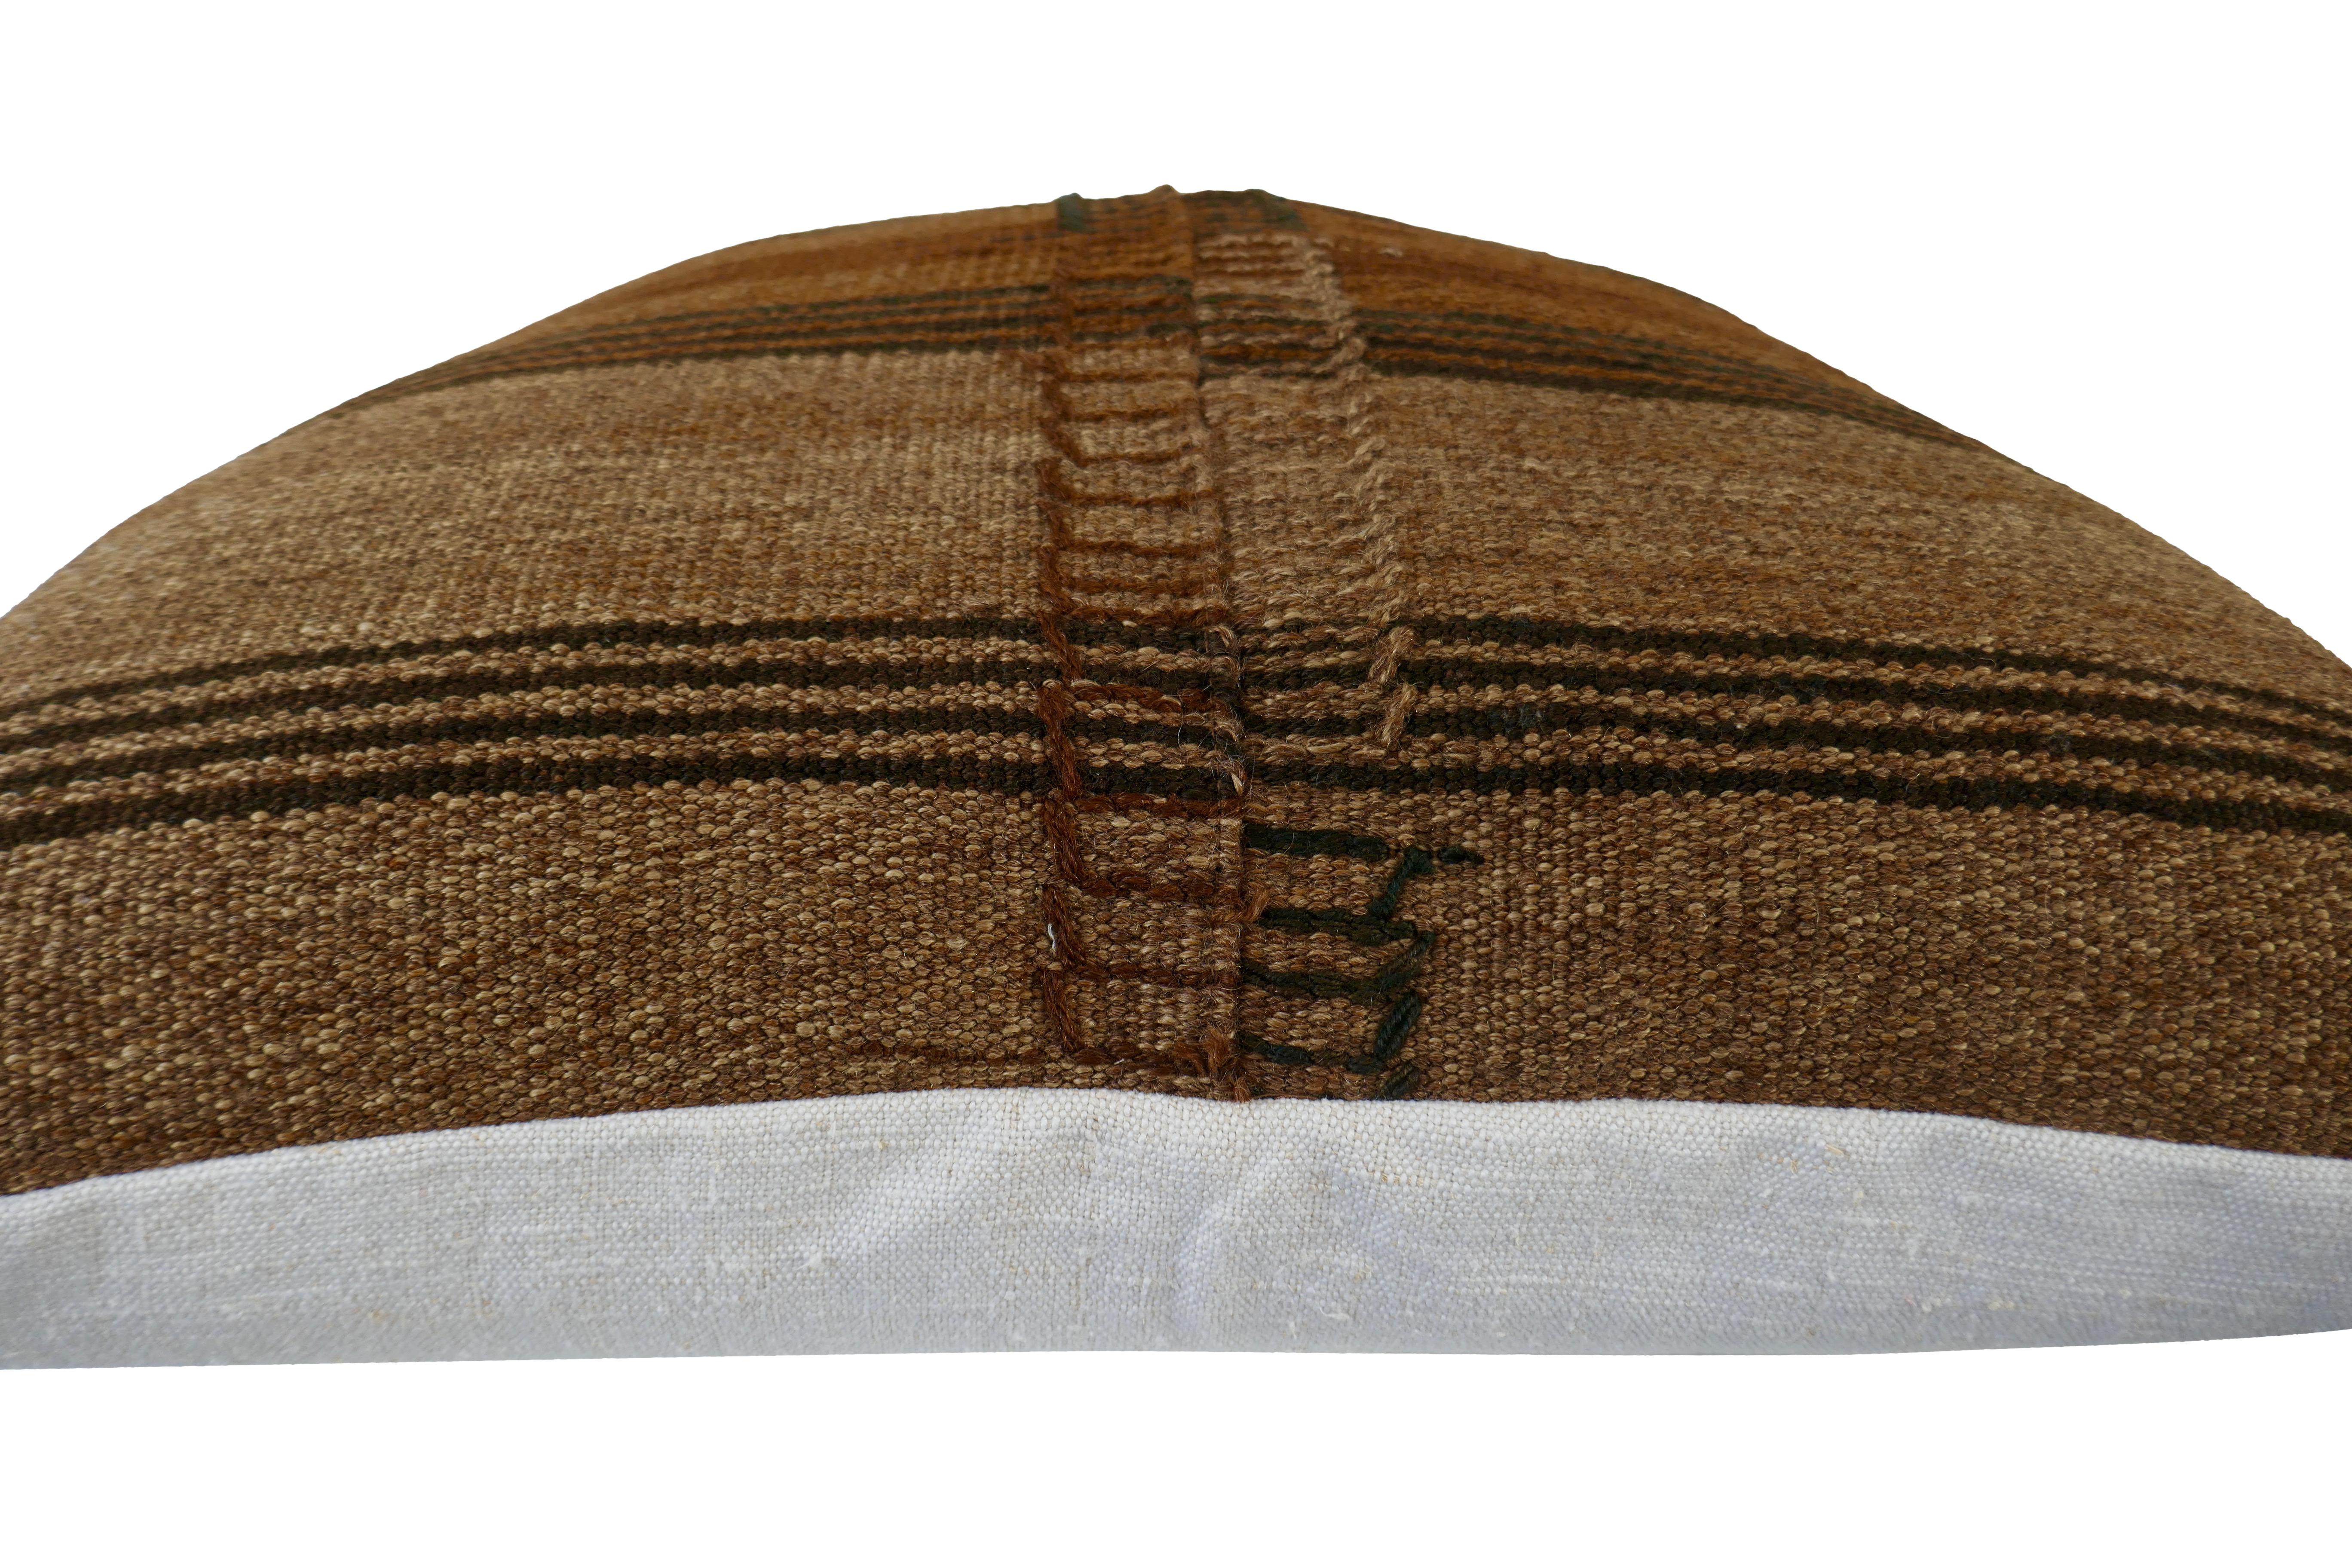 Hand-Crafted FI Vintage Berber Kilim Wool & French Hand-Spun Linen Pillow For Sale